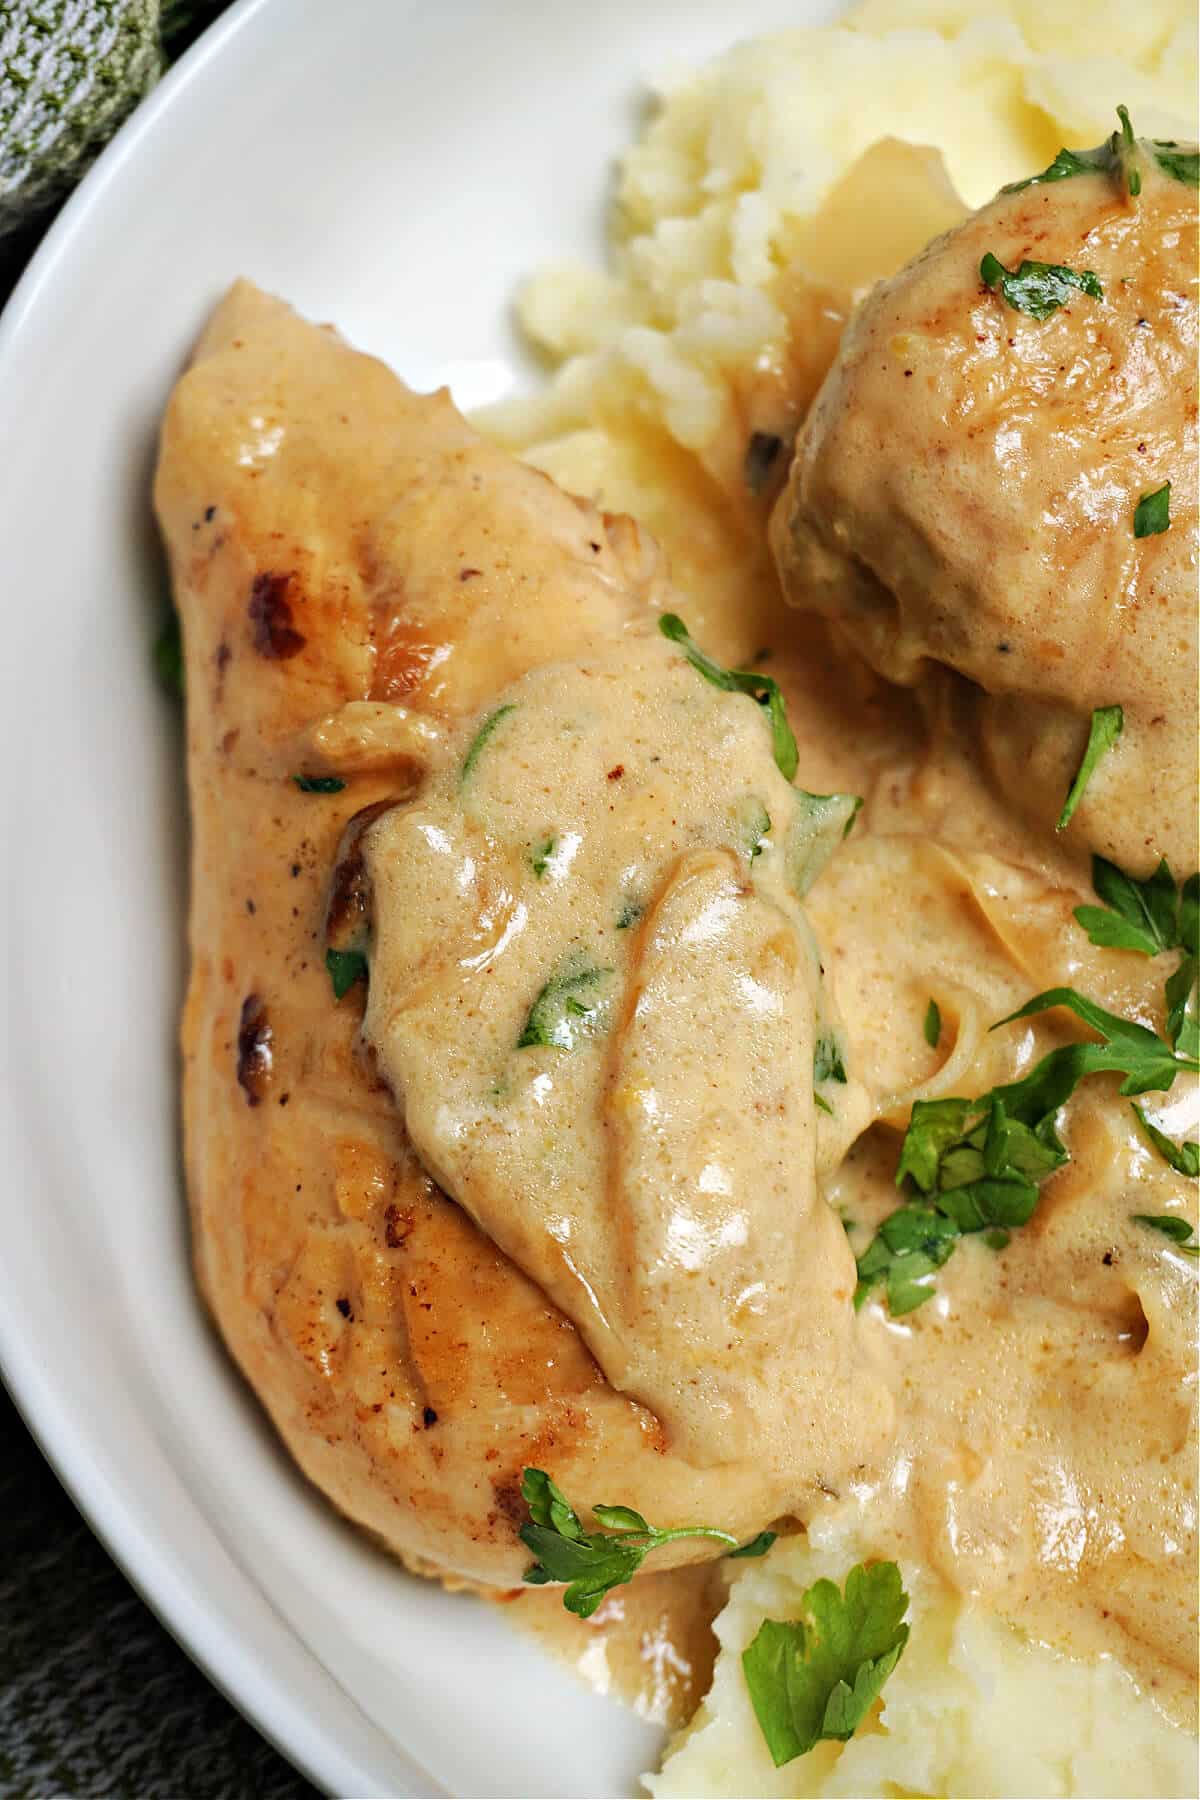 Close-up shoot of a chicken breast smothered in a lemon sauce on a bed of mash.